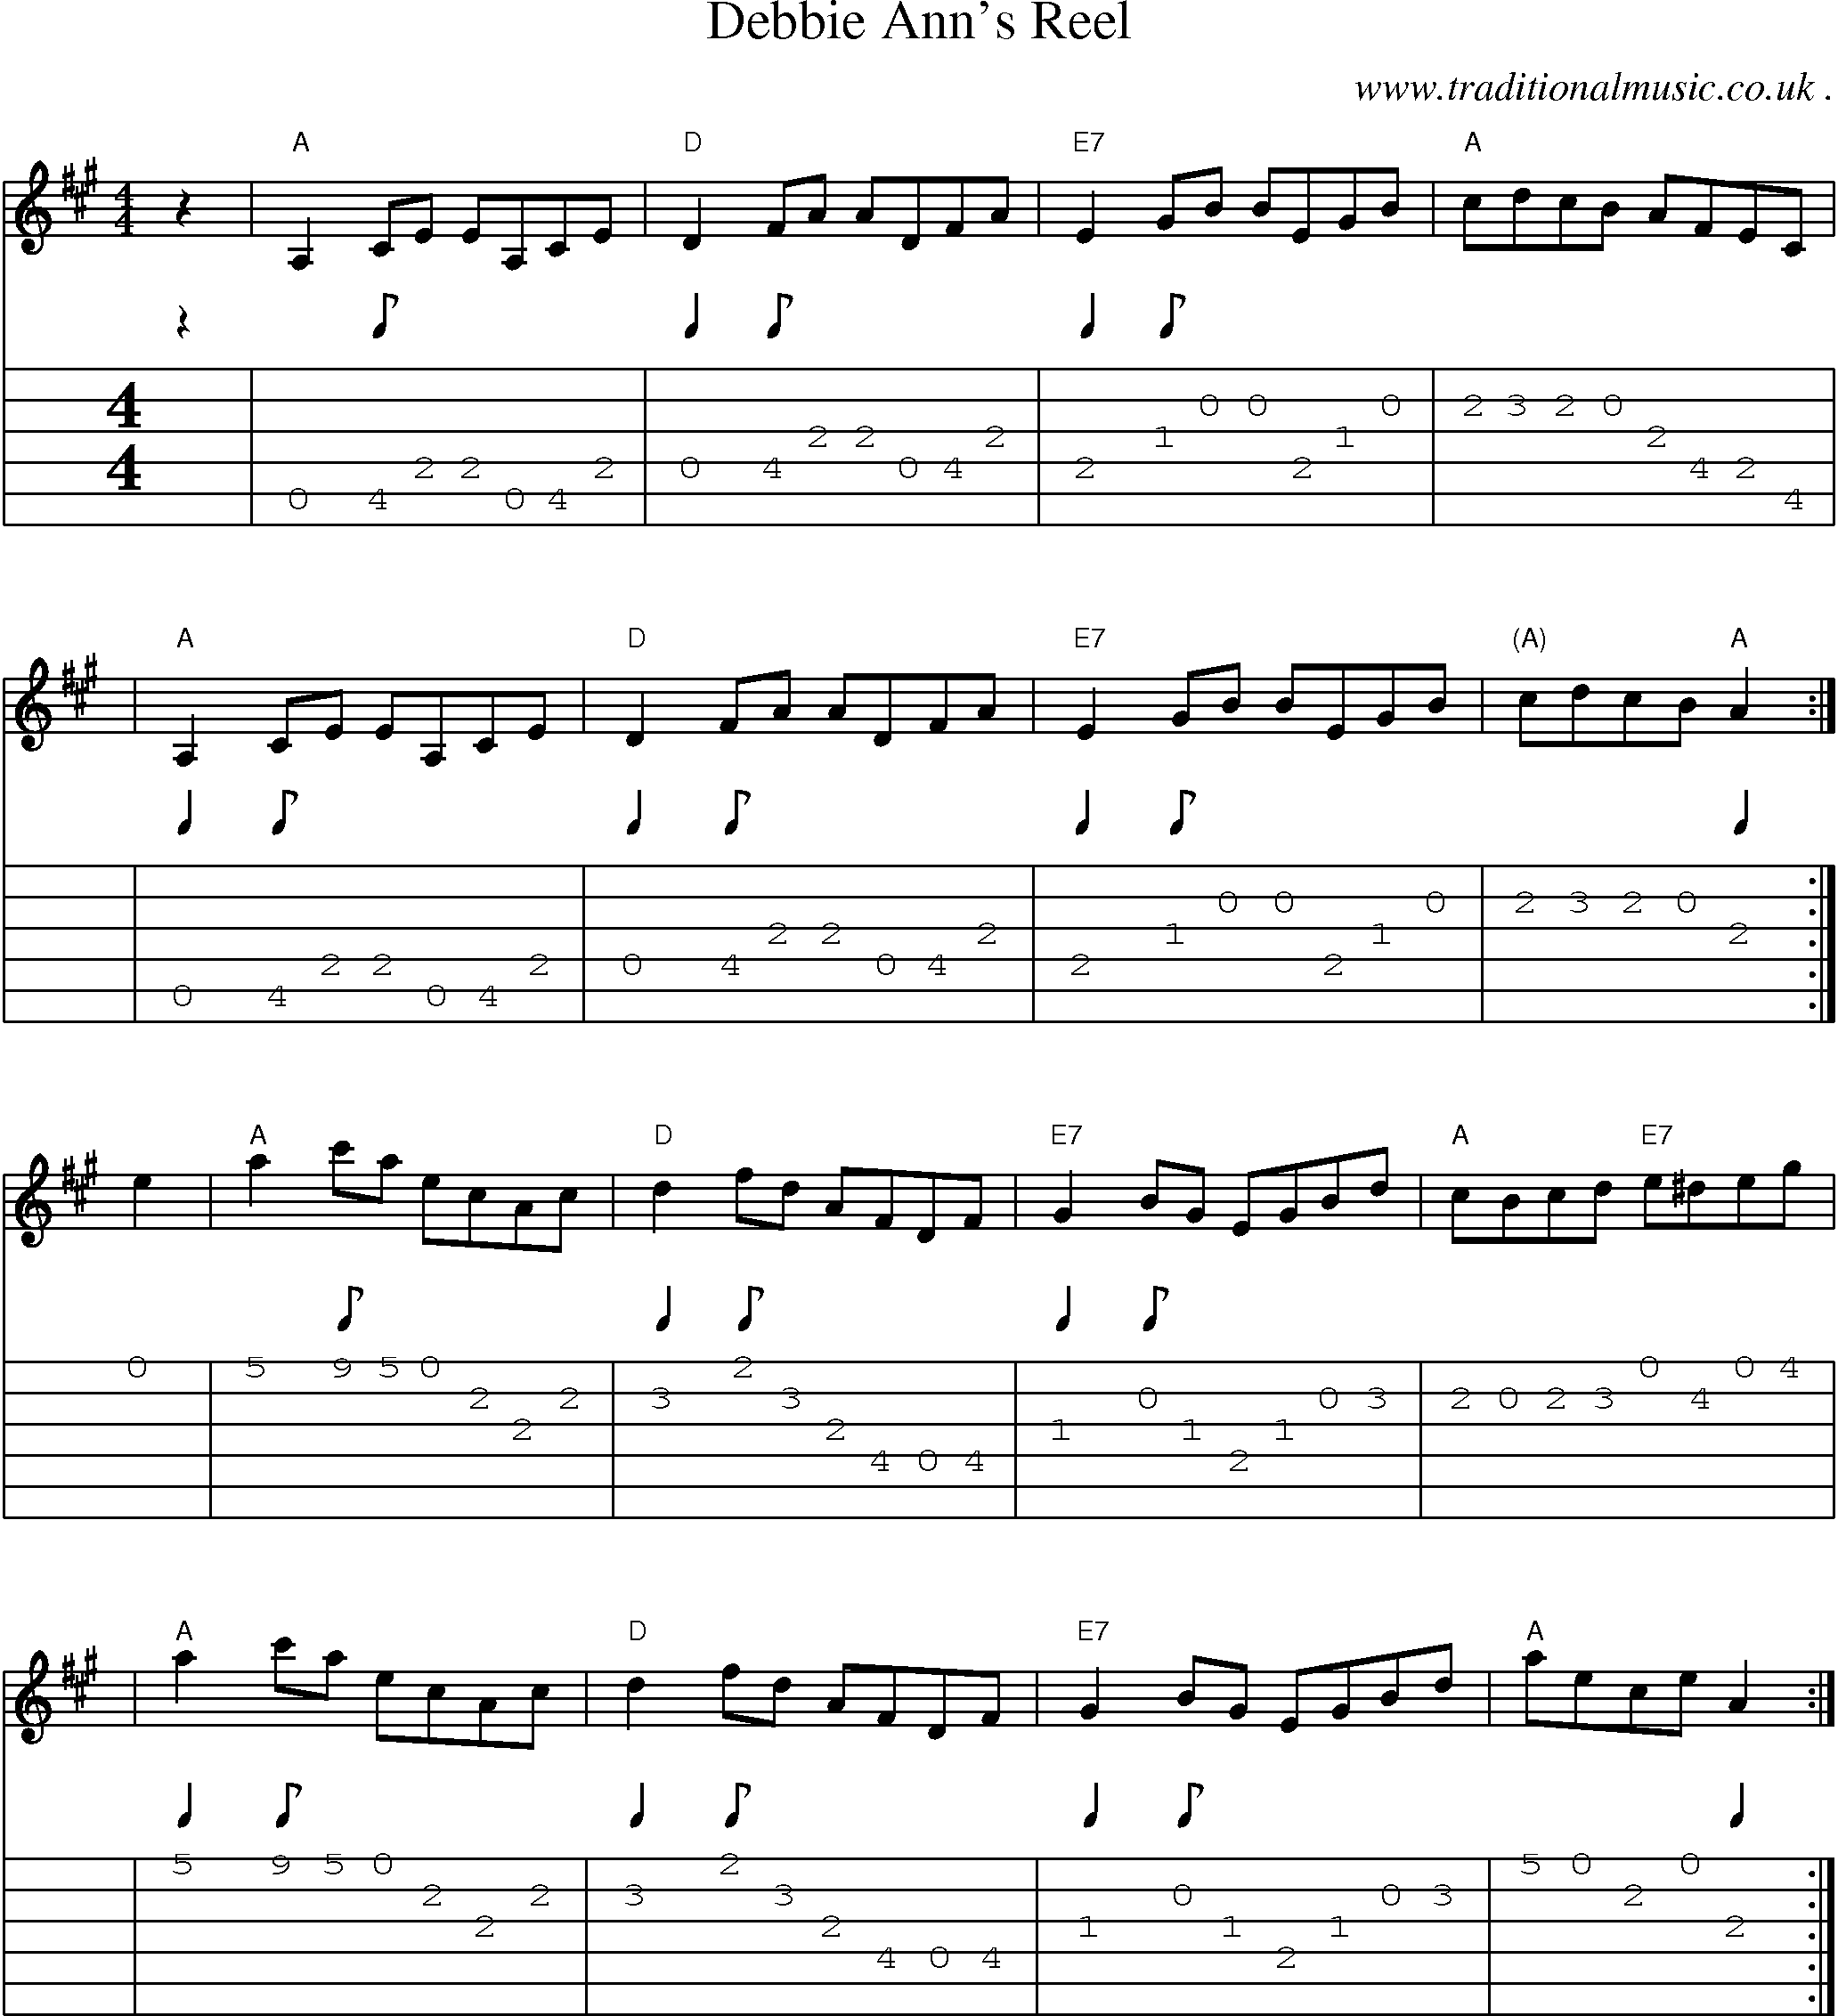 Sheet-music  score, Chords and Guitar Tabs for Debbie Anns Reel